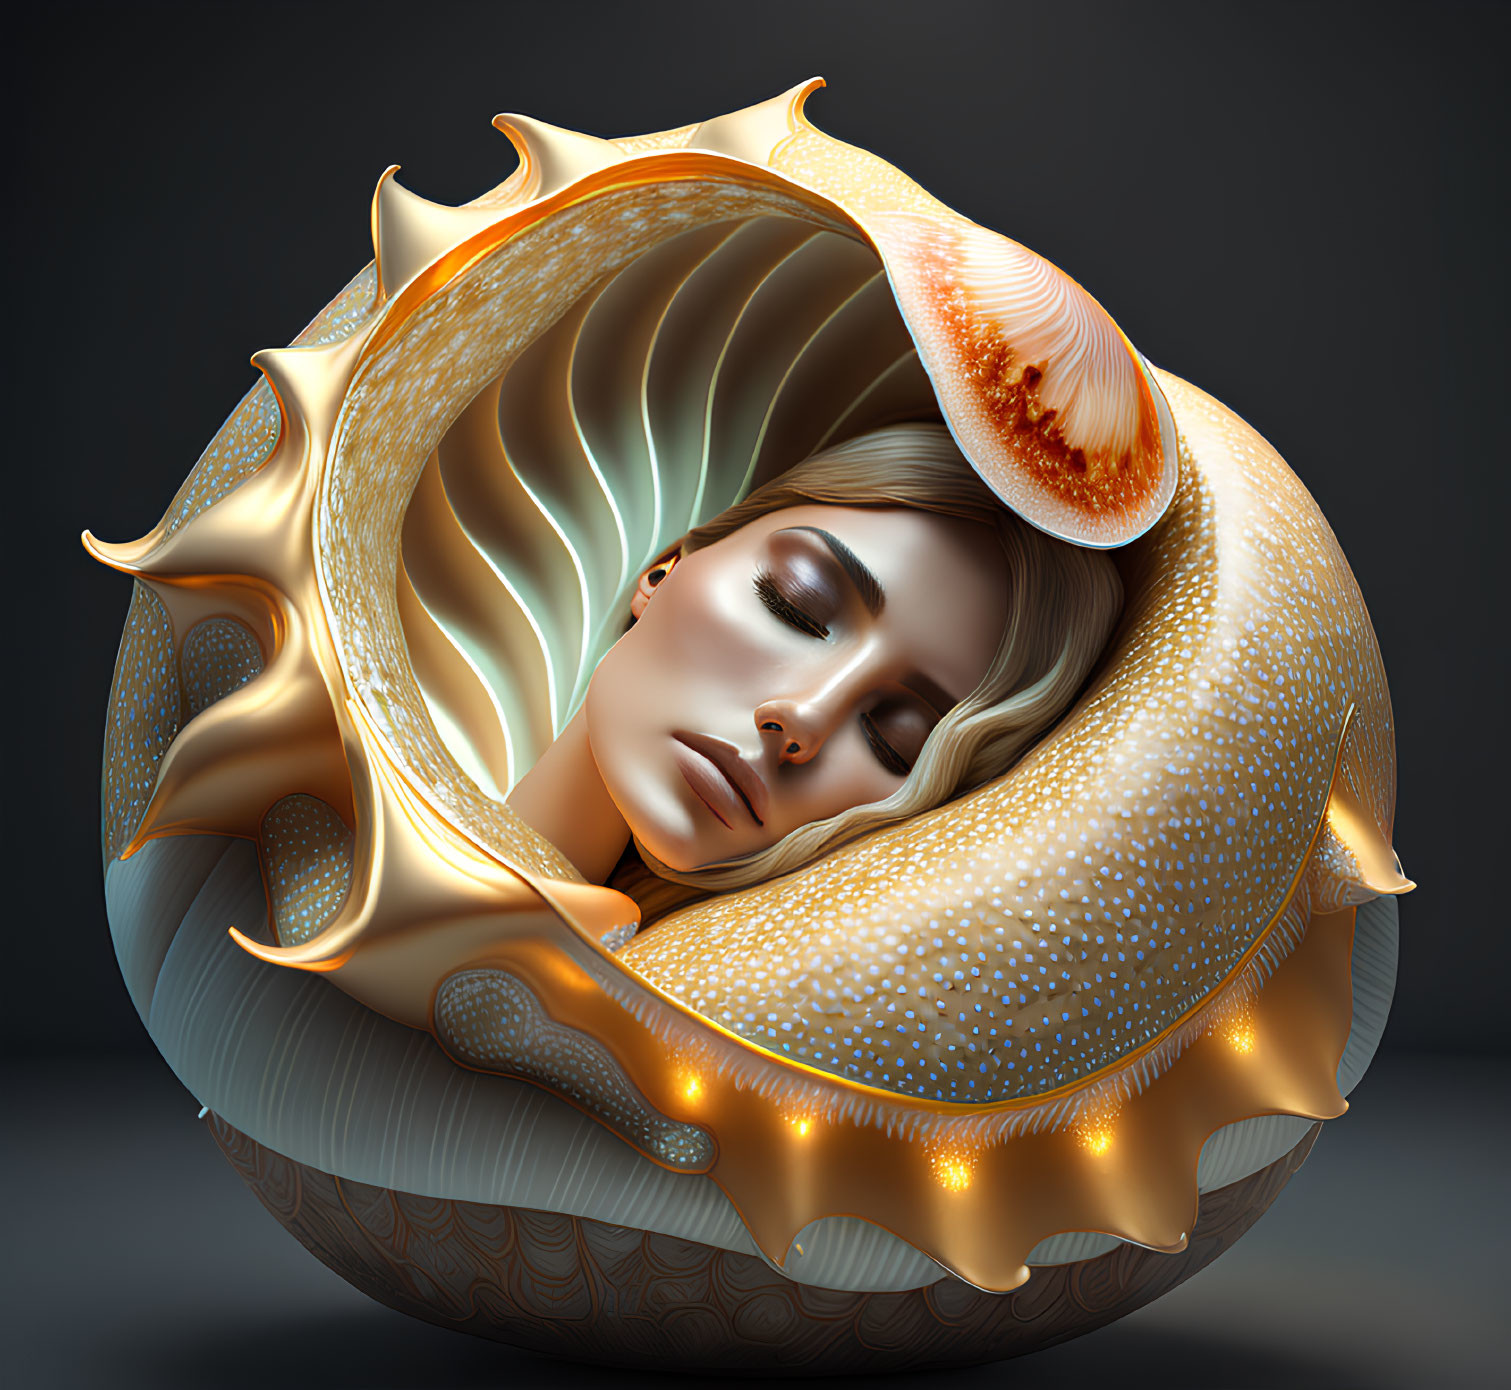 Surreal image of woman's face in ornate shell structure